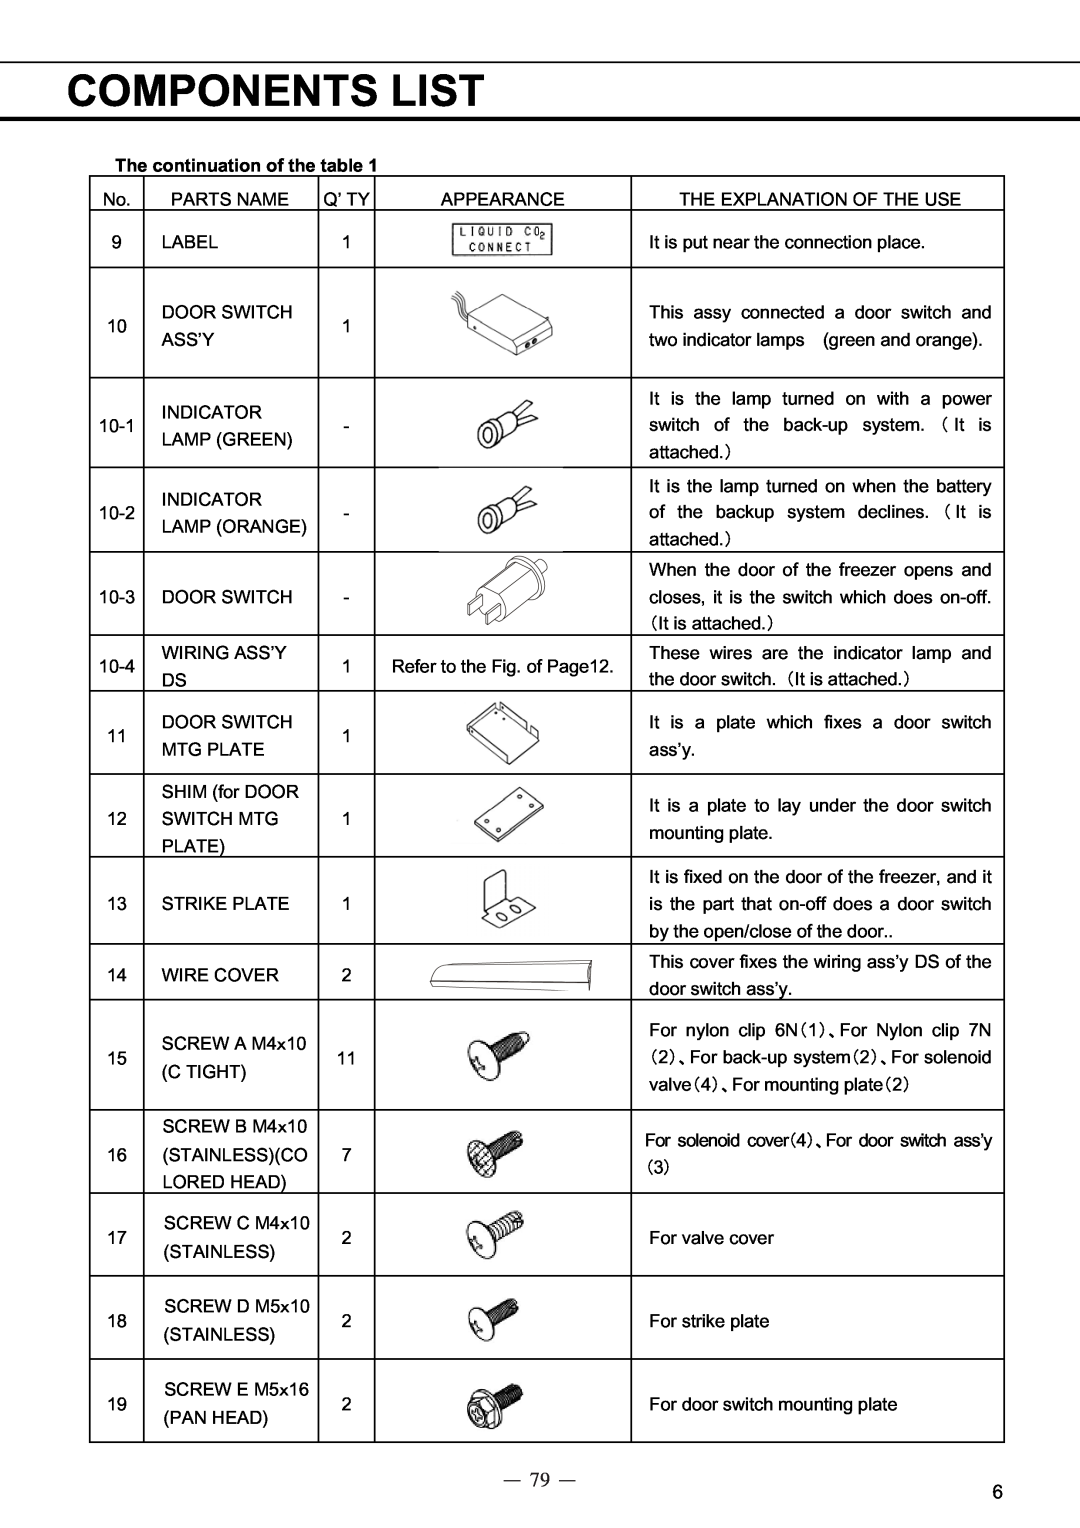 Sanyo MDF-C8V service manual Components List, The continuation of the table 